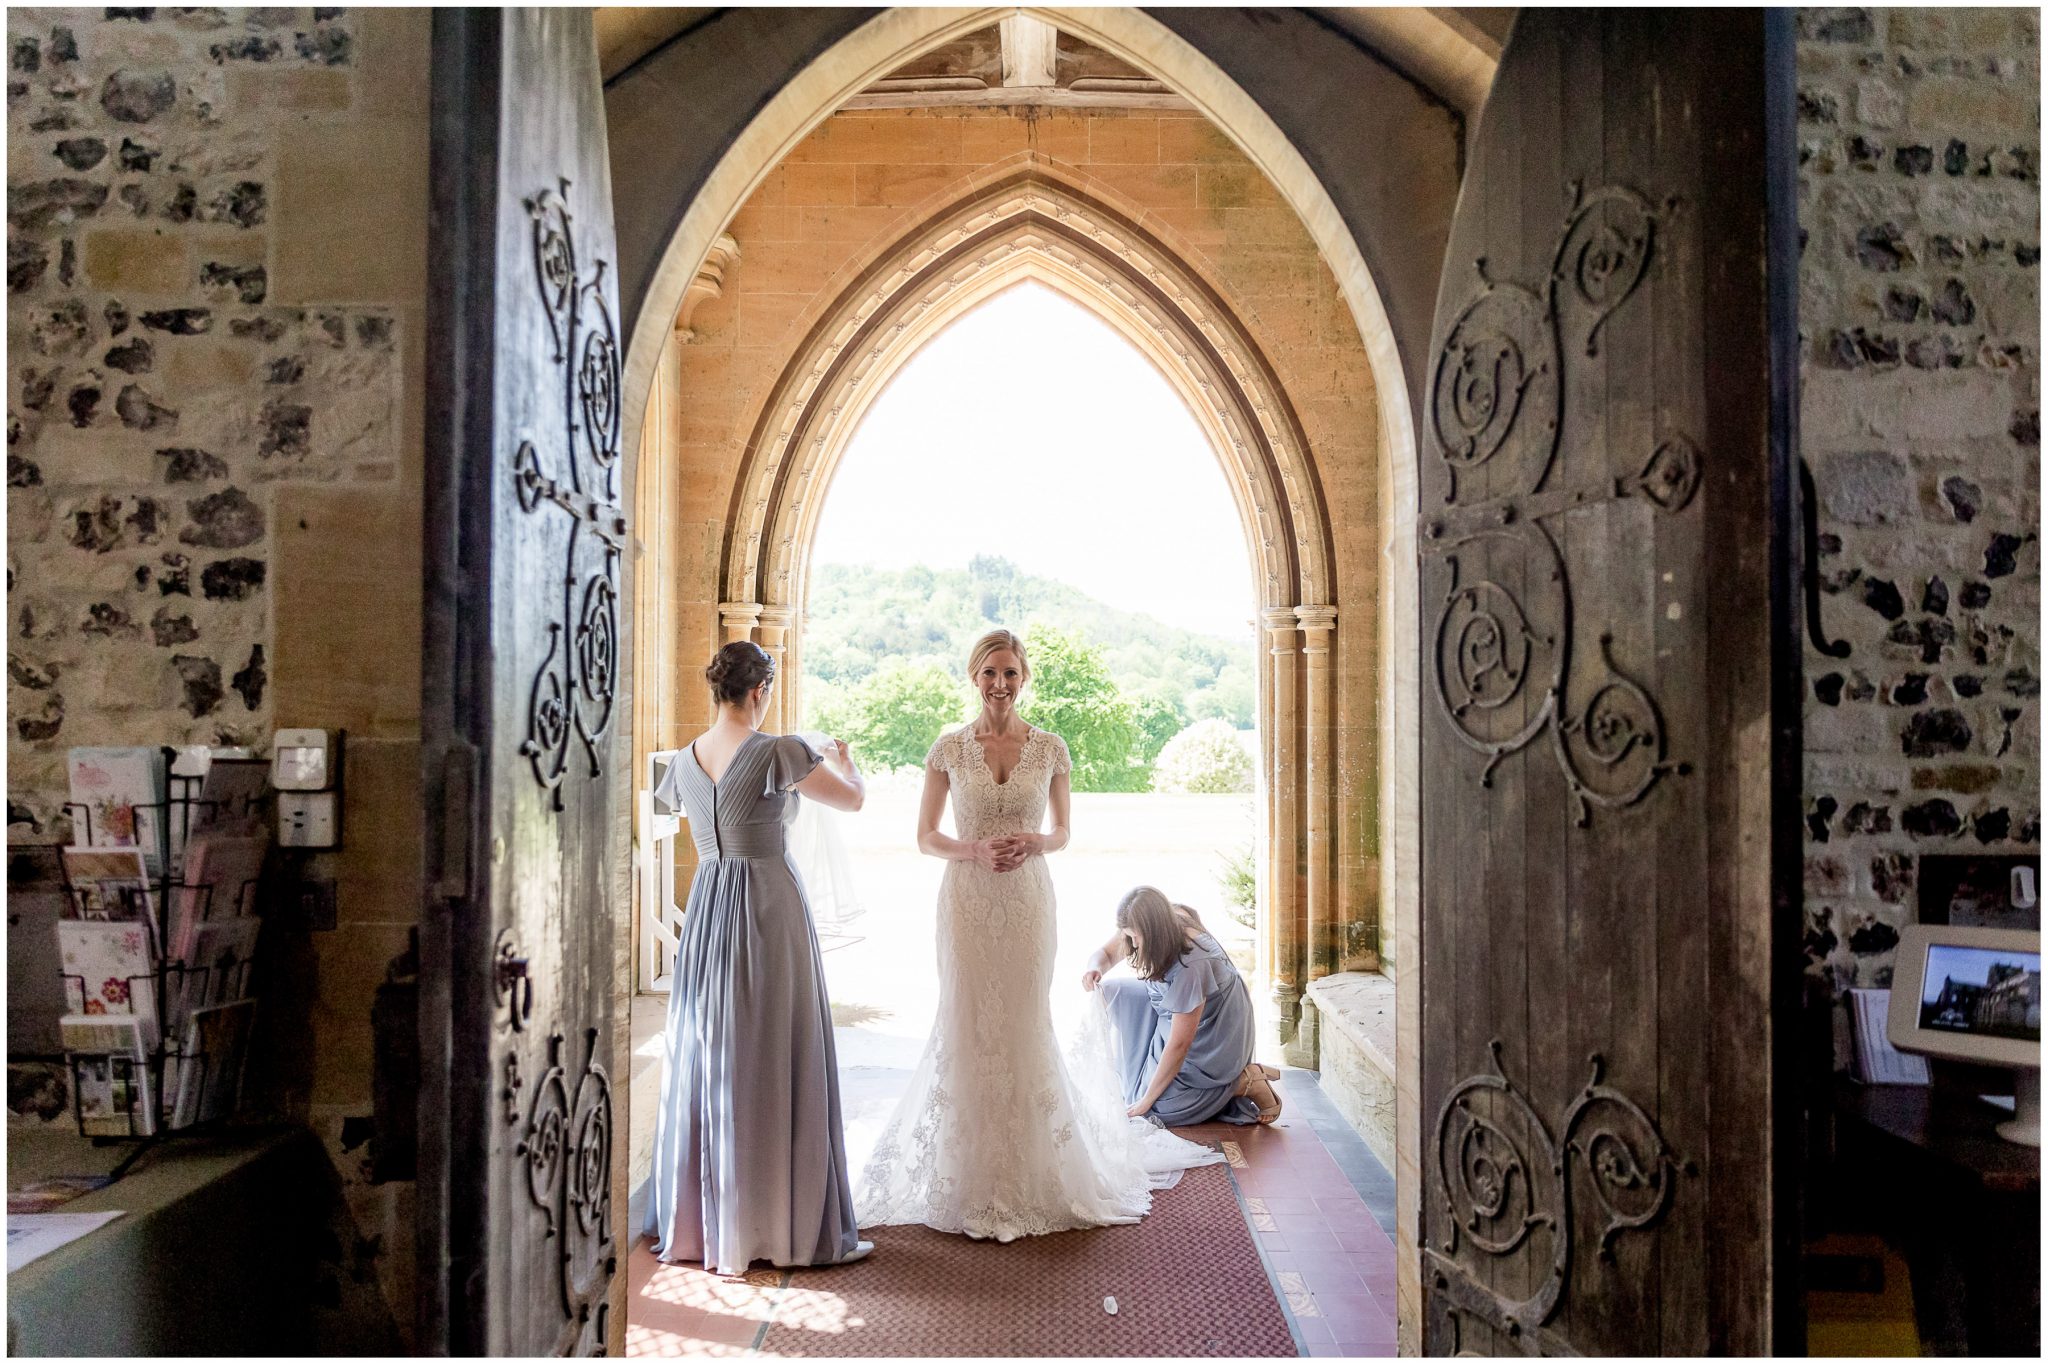 The bride stands in the doorway to the church, ready to walk down the aisle